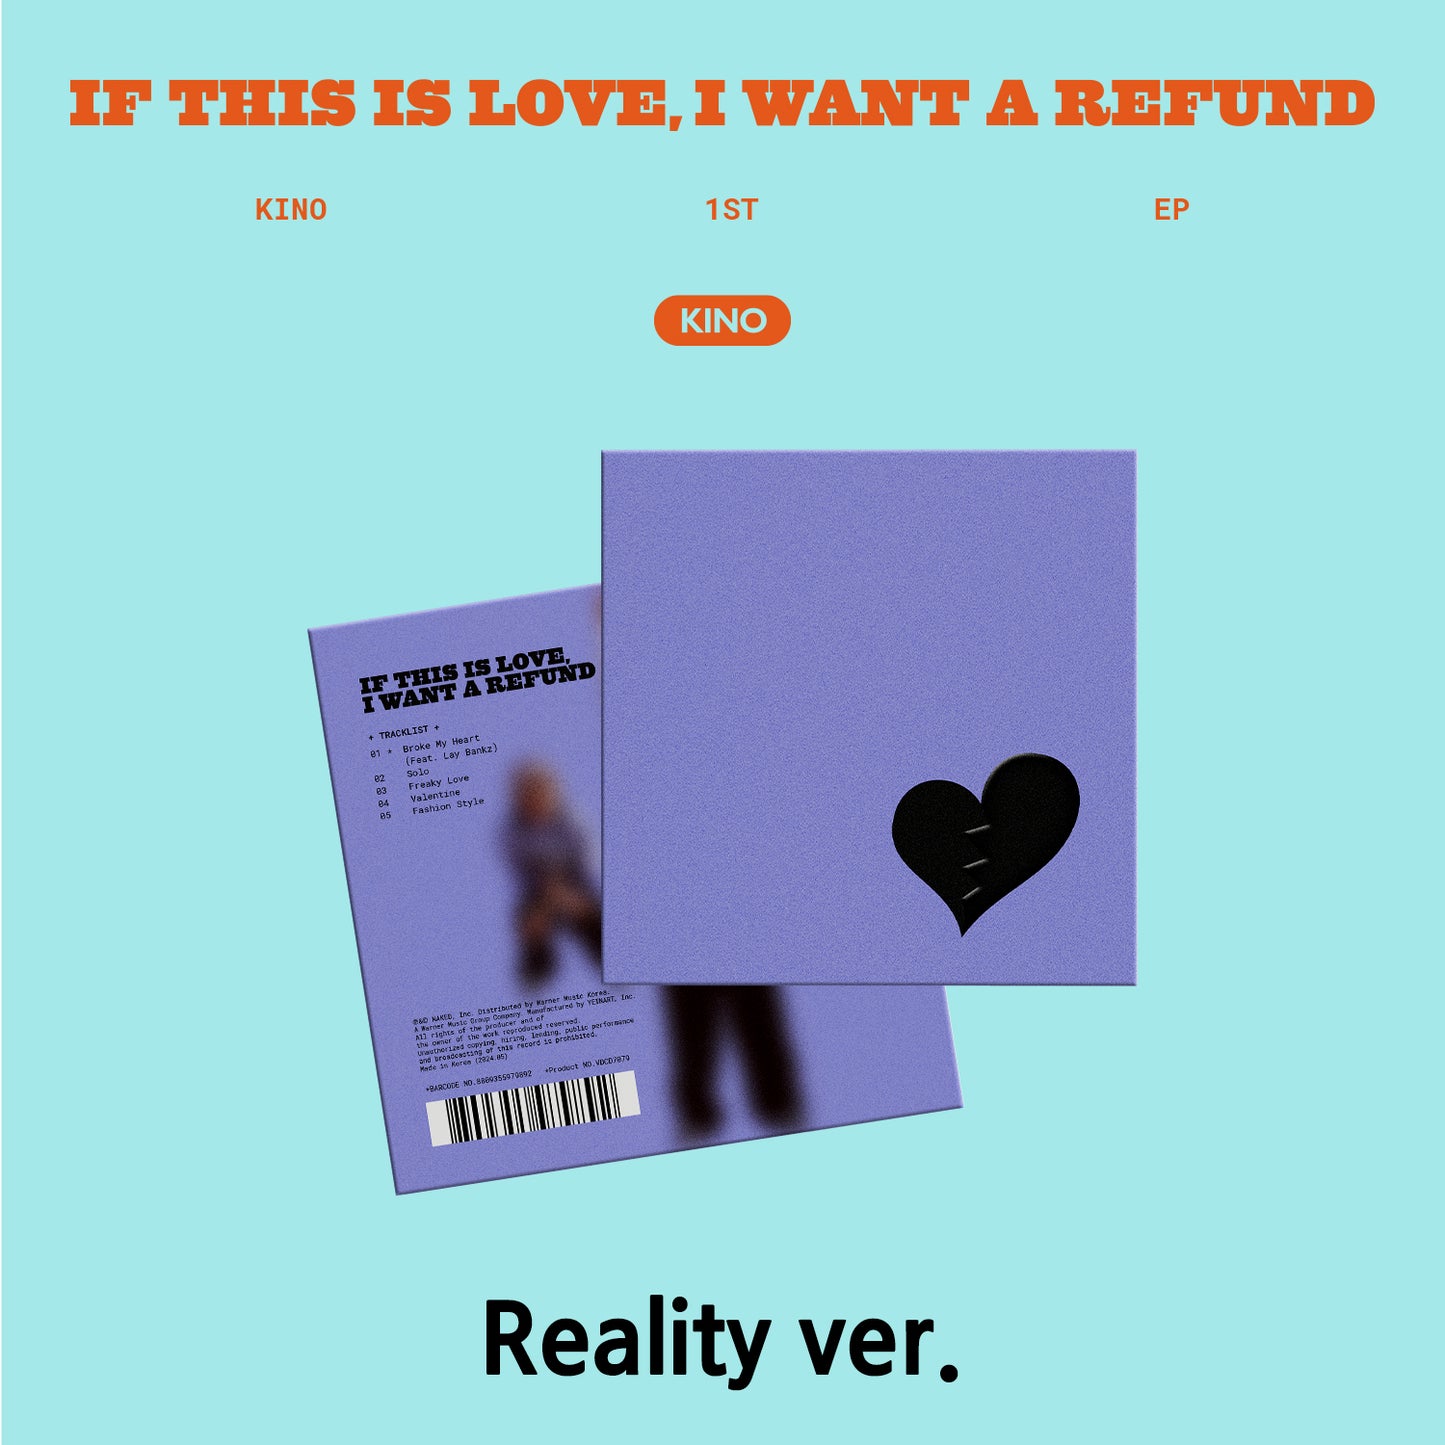 KINO - If this is love, I want a refund (Expectation ver. / Reality ver.)